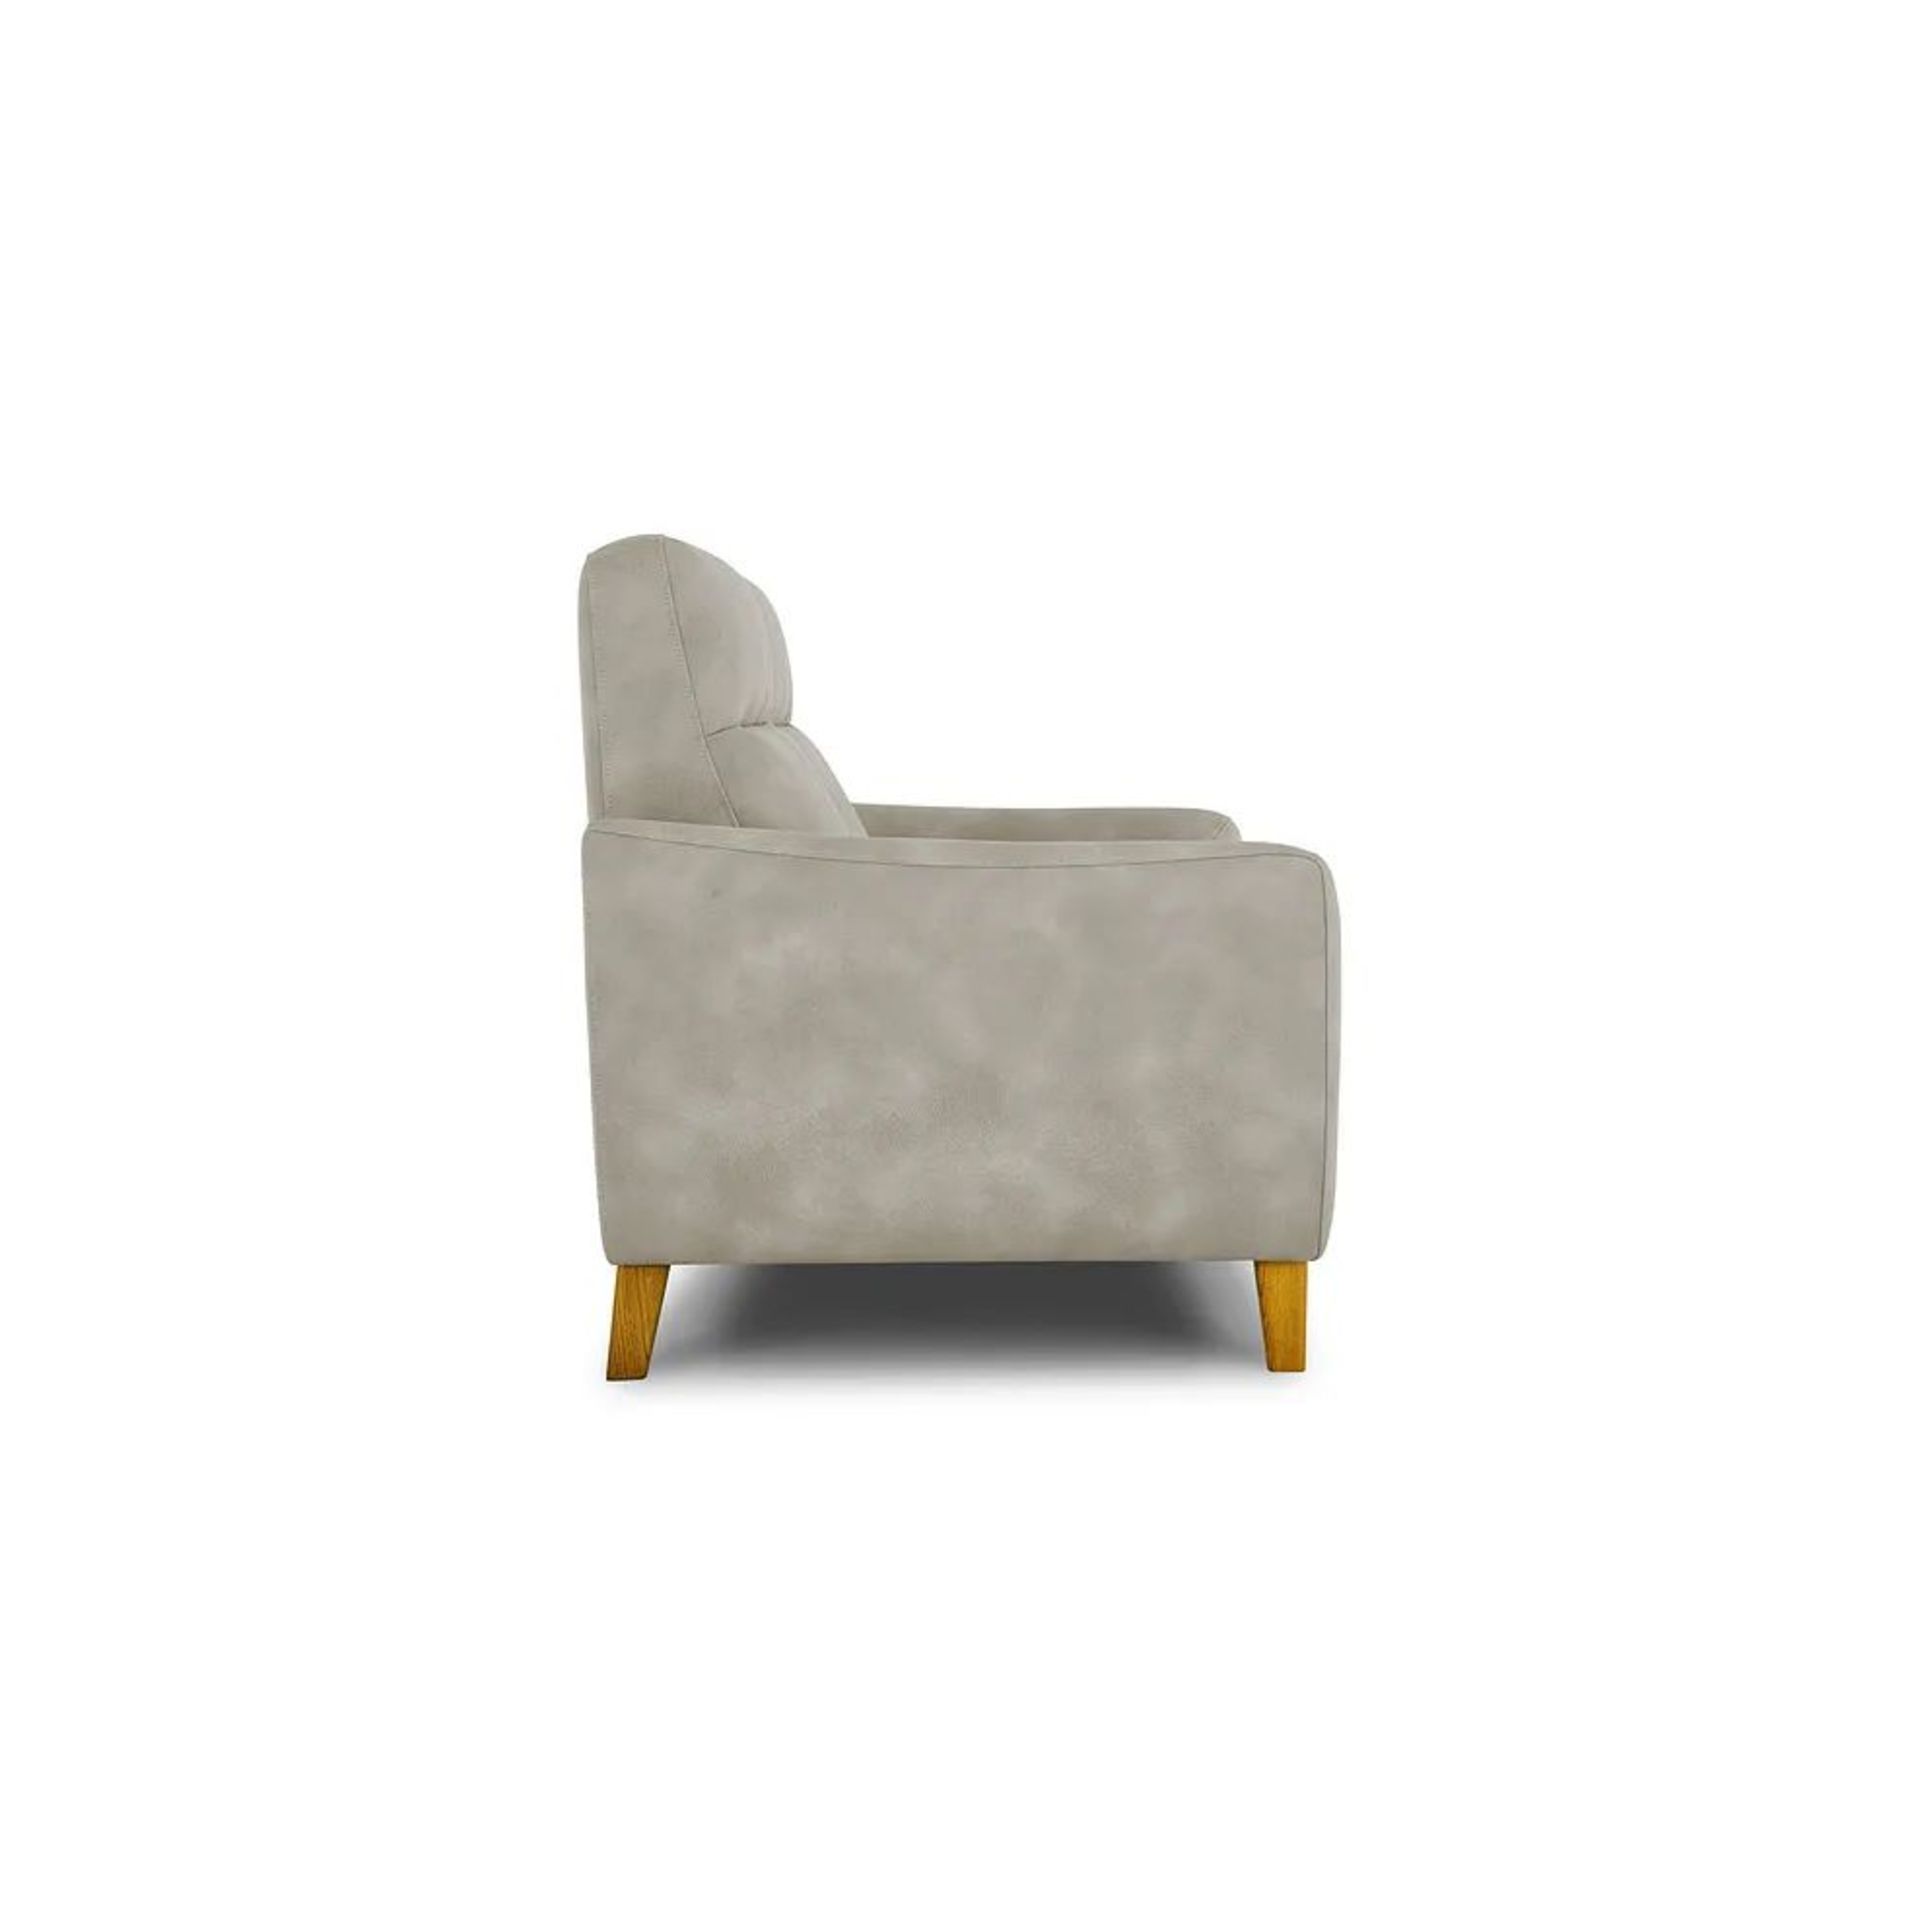 BRAND NEW DYLAN Static Armchair - OXFORD BEIGE FABRIC. RRP £749. Our Dylan armchair, shown here in - Image 4 of 8